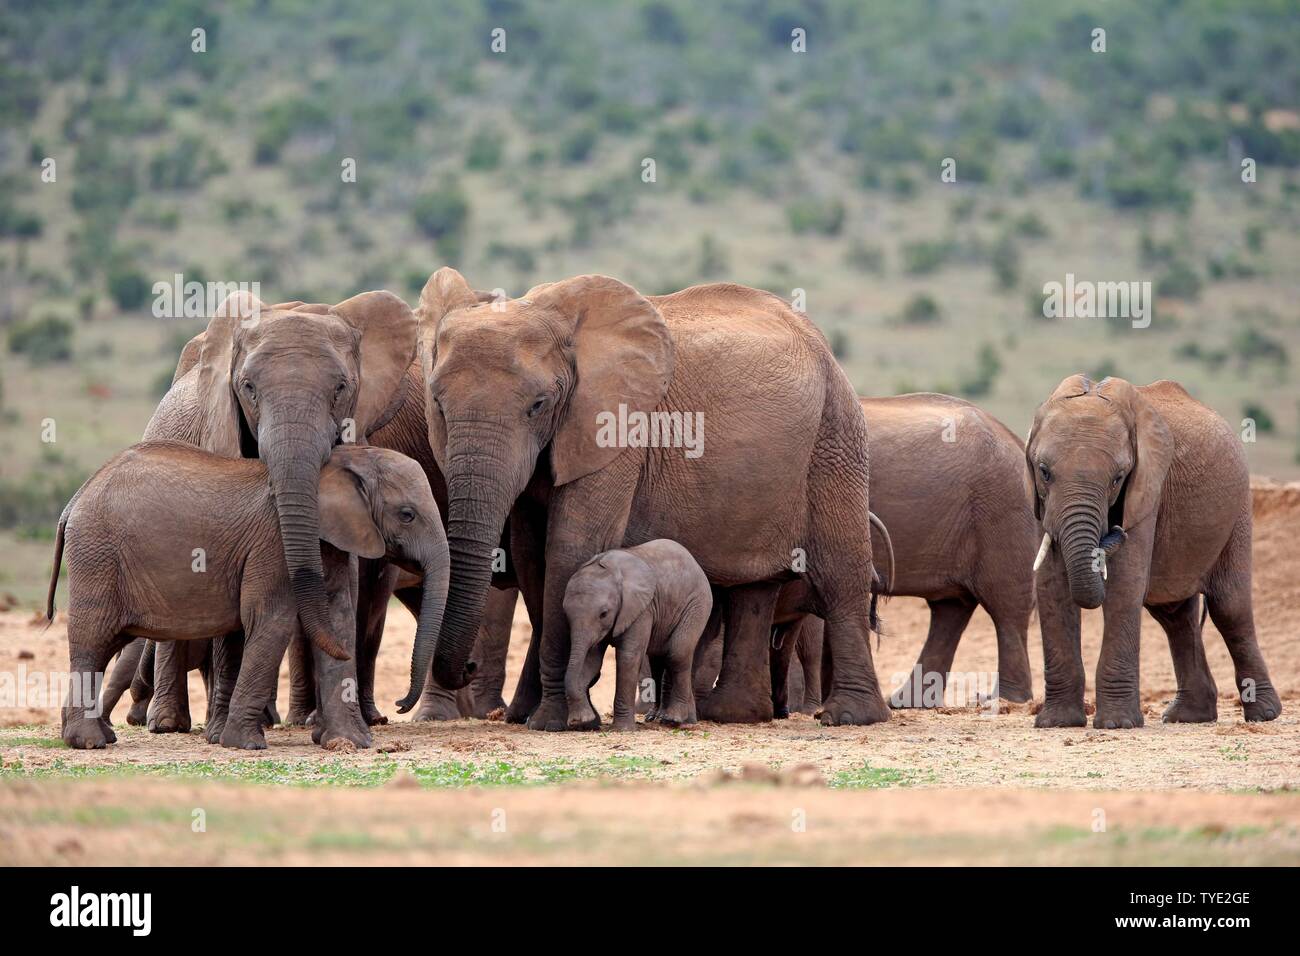 African elephants (Loxodonta africana), herd stands together, adult and young animals, Addo Elephant National Park, Eastern Cape, South Africa Stock Photo